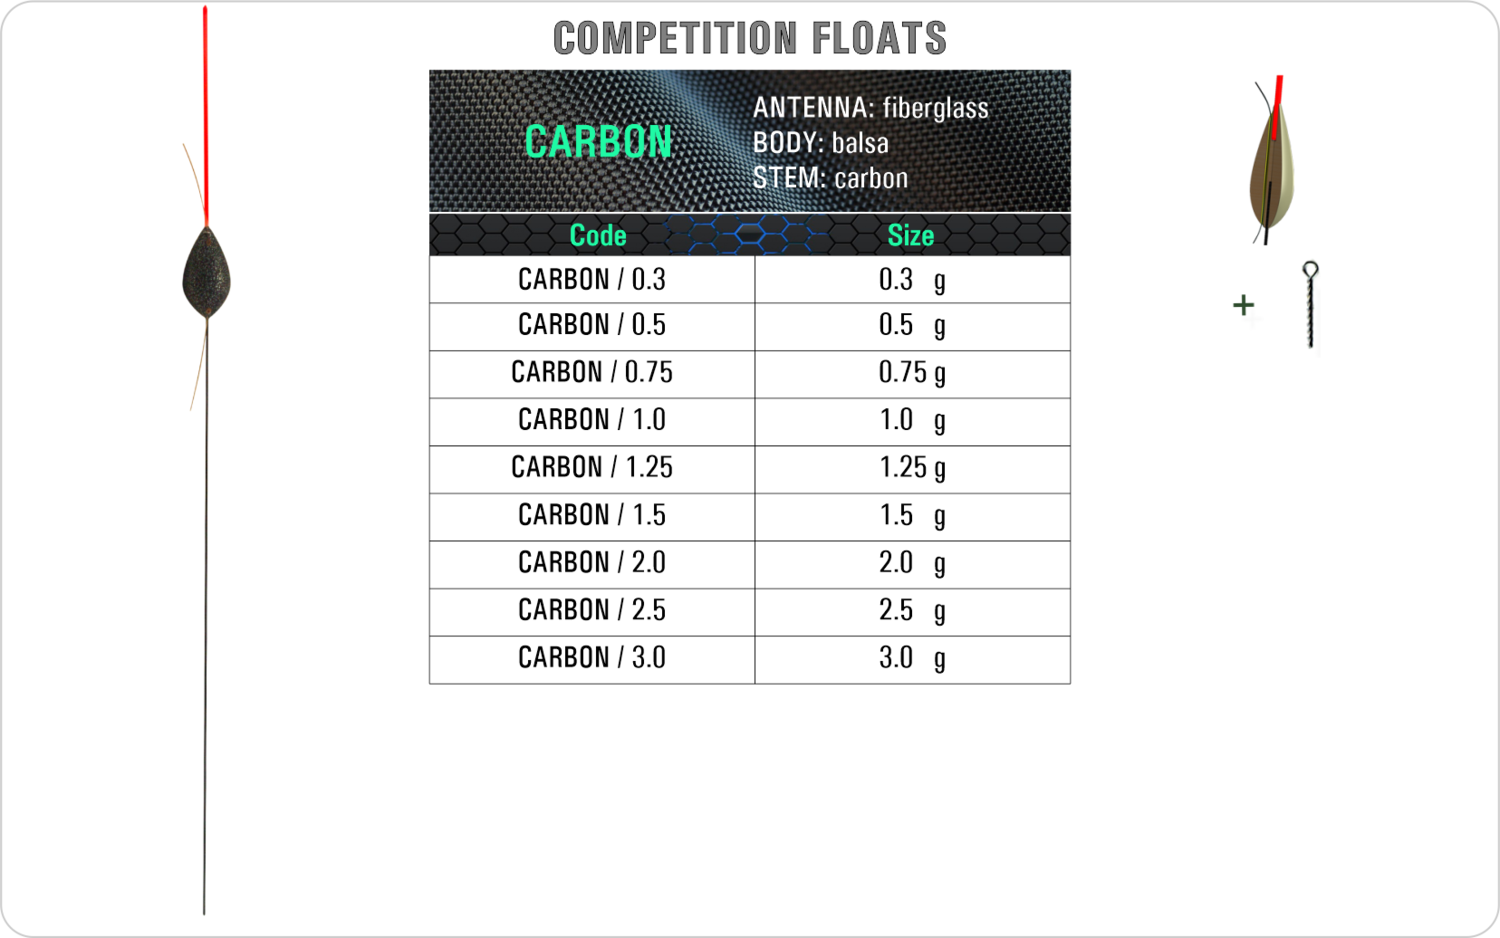 CARBON Competition float model and table containing an additional information about this float with different codes, sizes, types of the body, the stem and the antenna of the float.